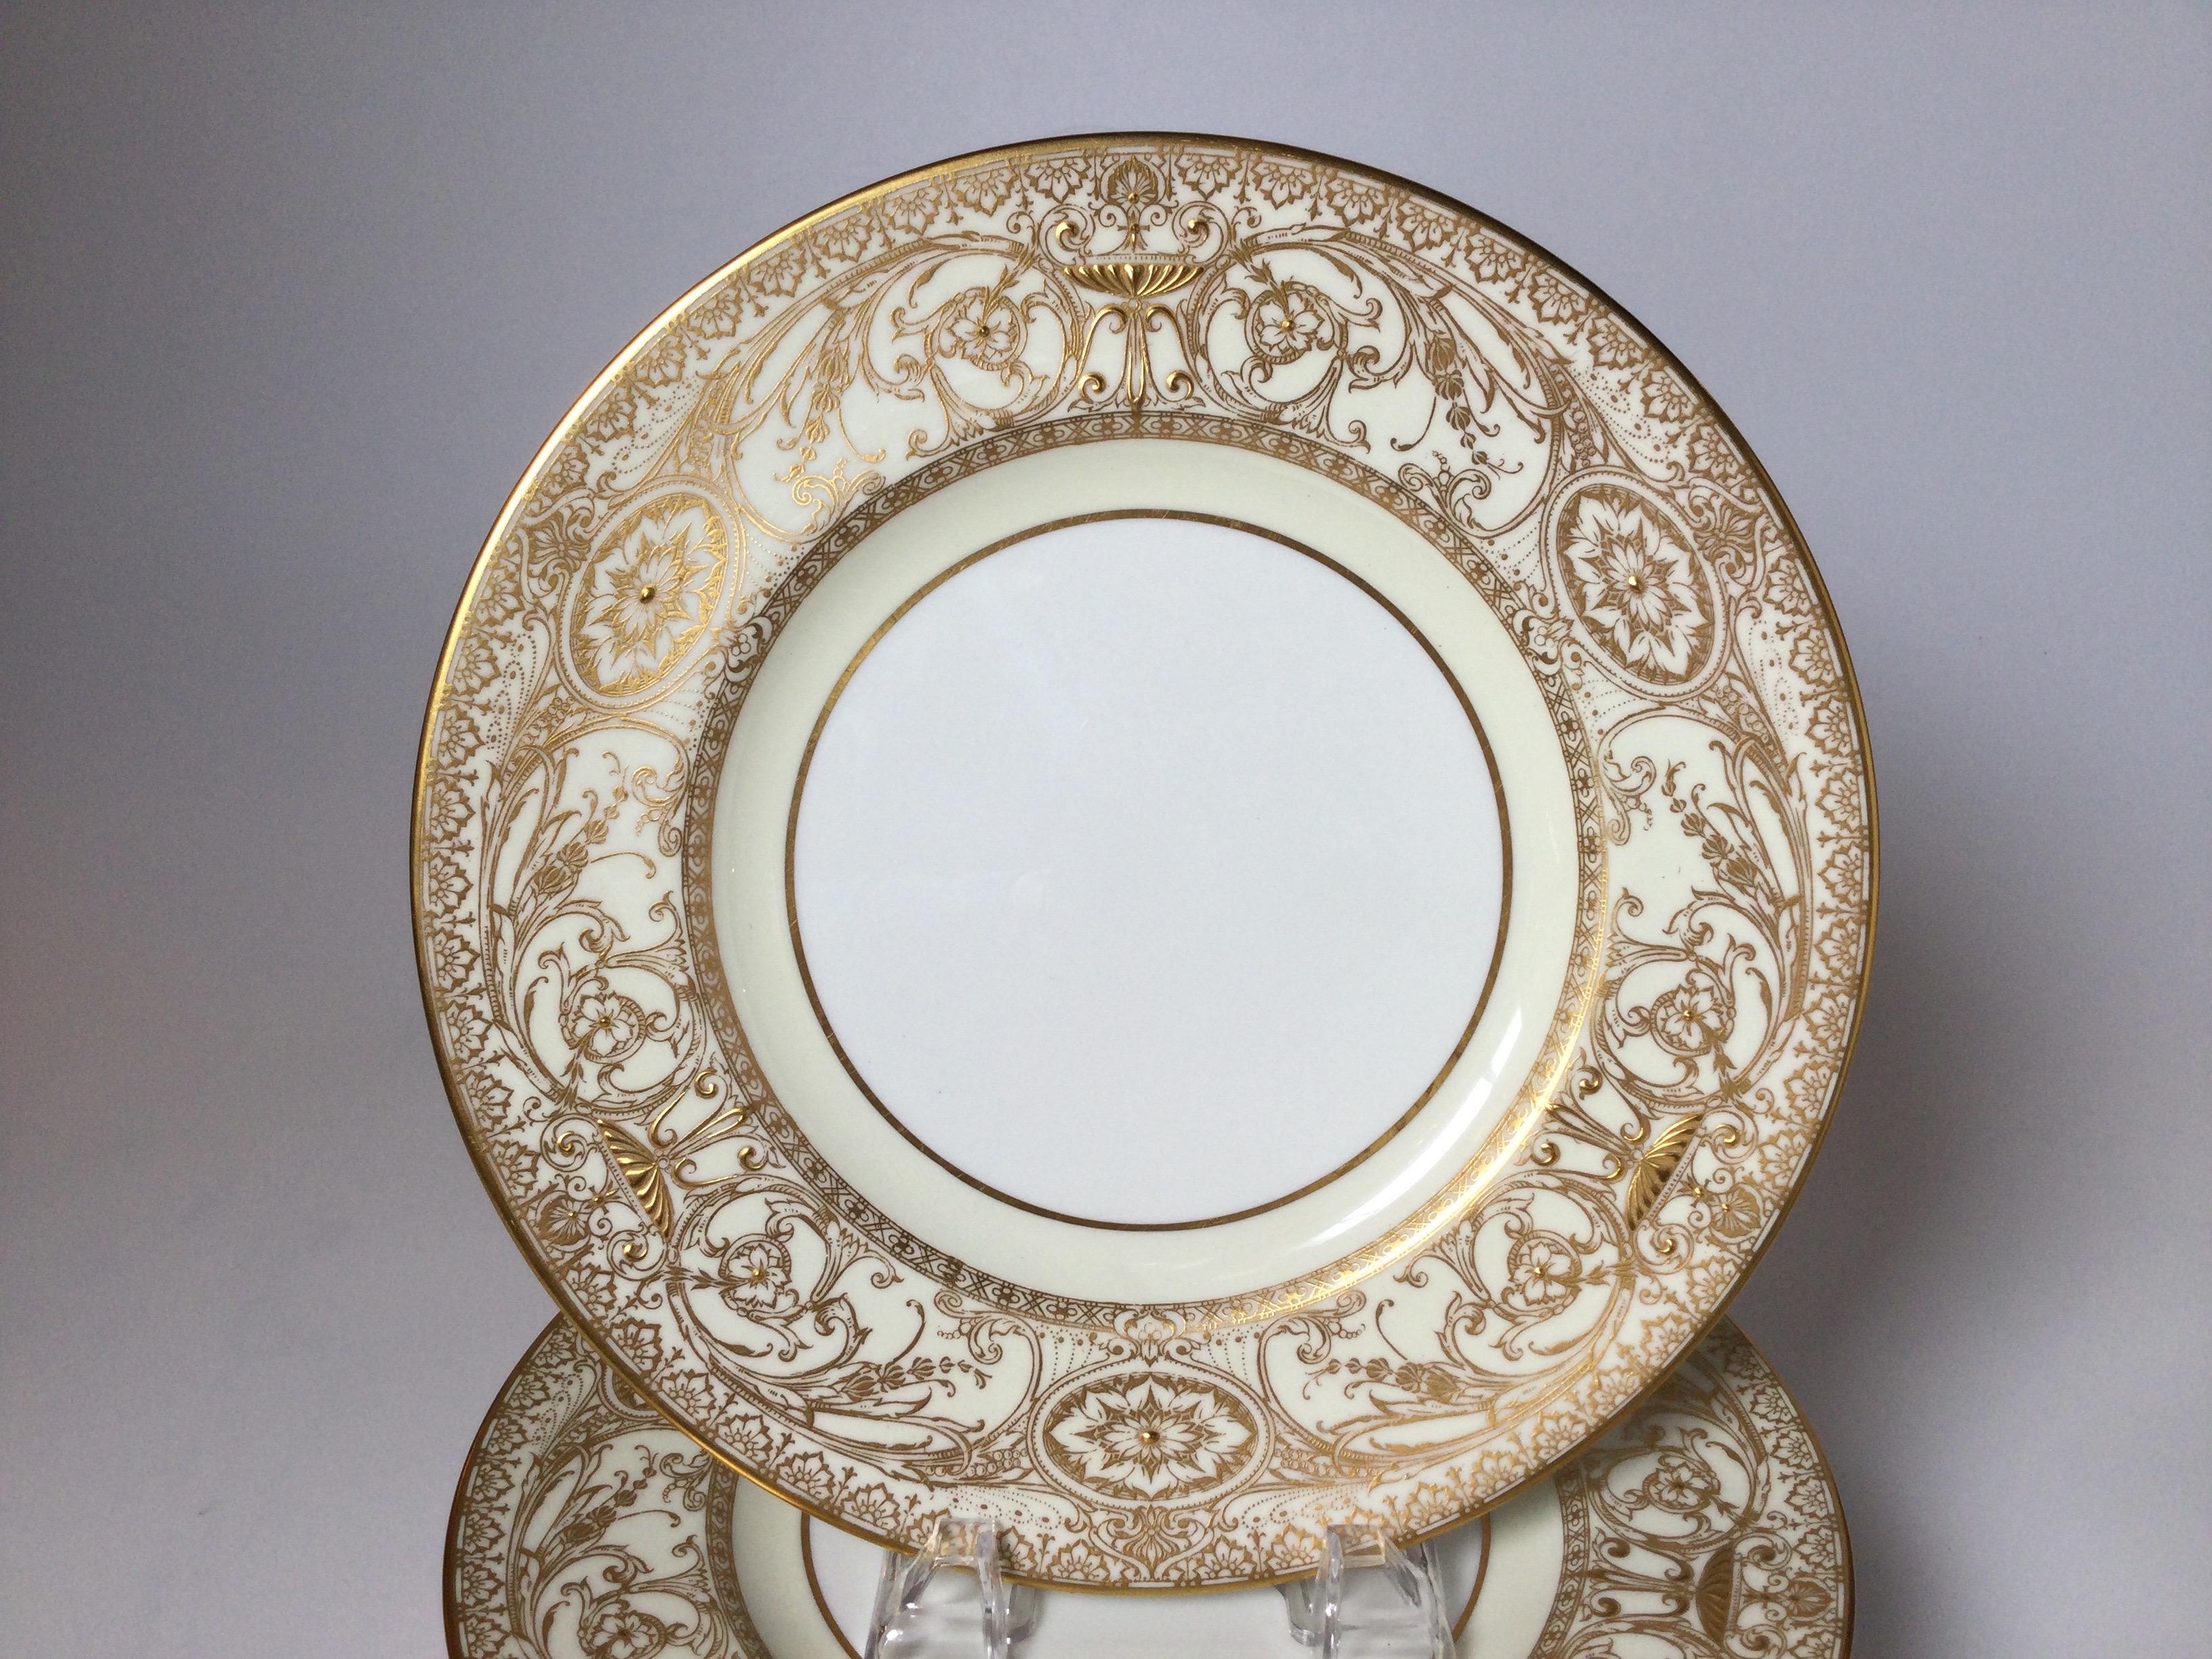 A regal set of 12 elaborately gild service plates, by Royal Worcester. The set with delicate broad gilt borders with a white porcelain background. The mark on the back from 1950.